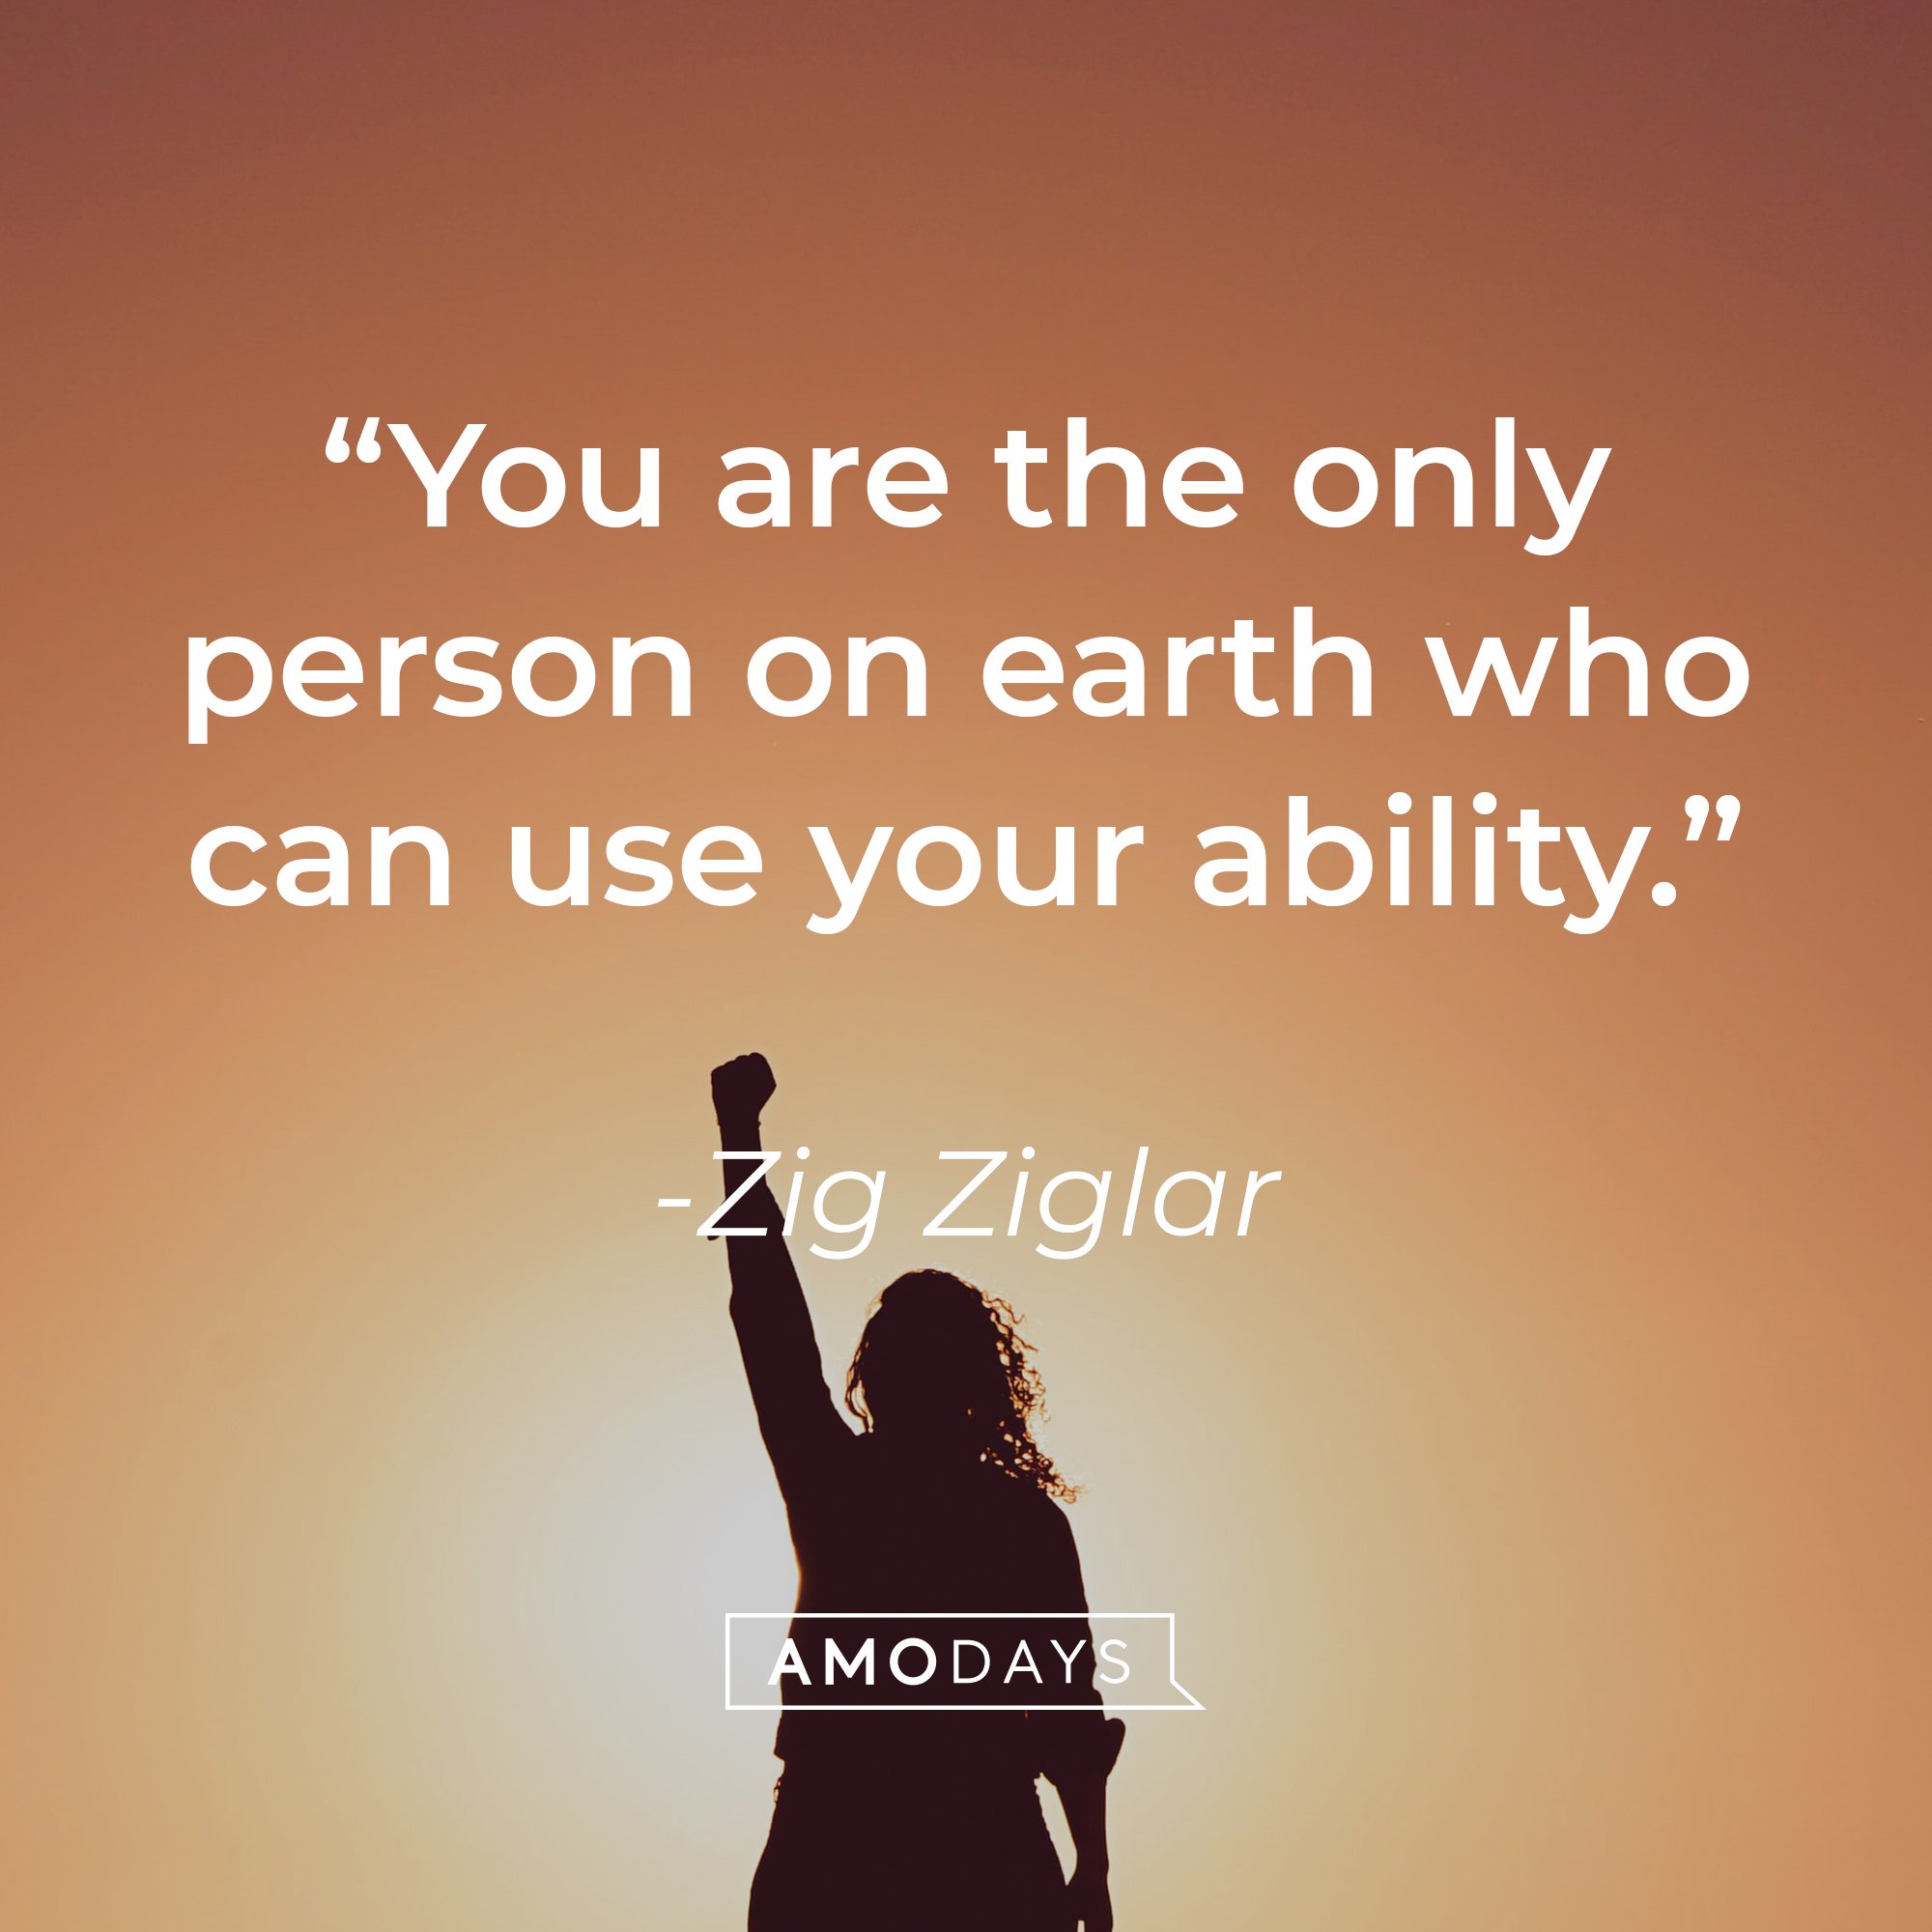 Zig Ziglar's quote: “You are the only person on earth who can use your ability.” | Images: AmoDays